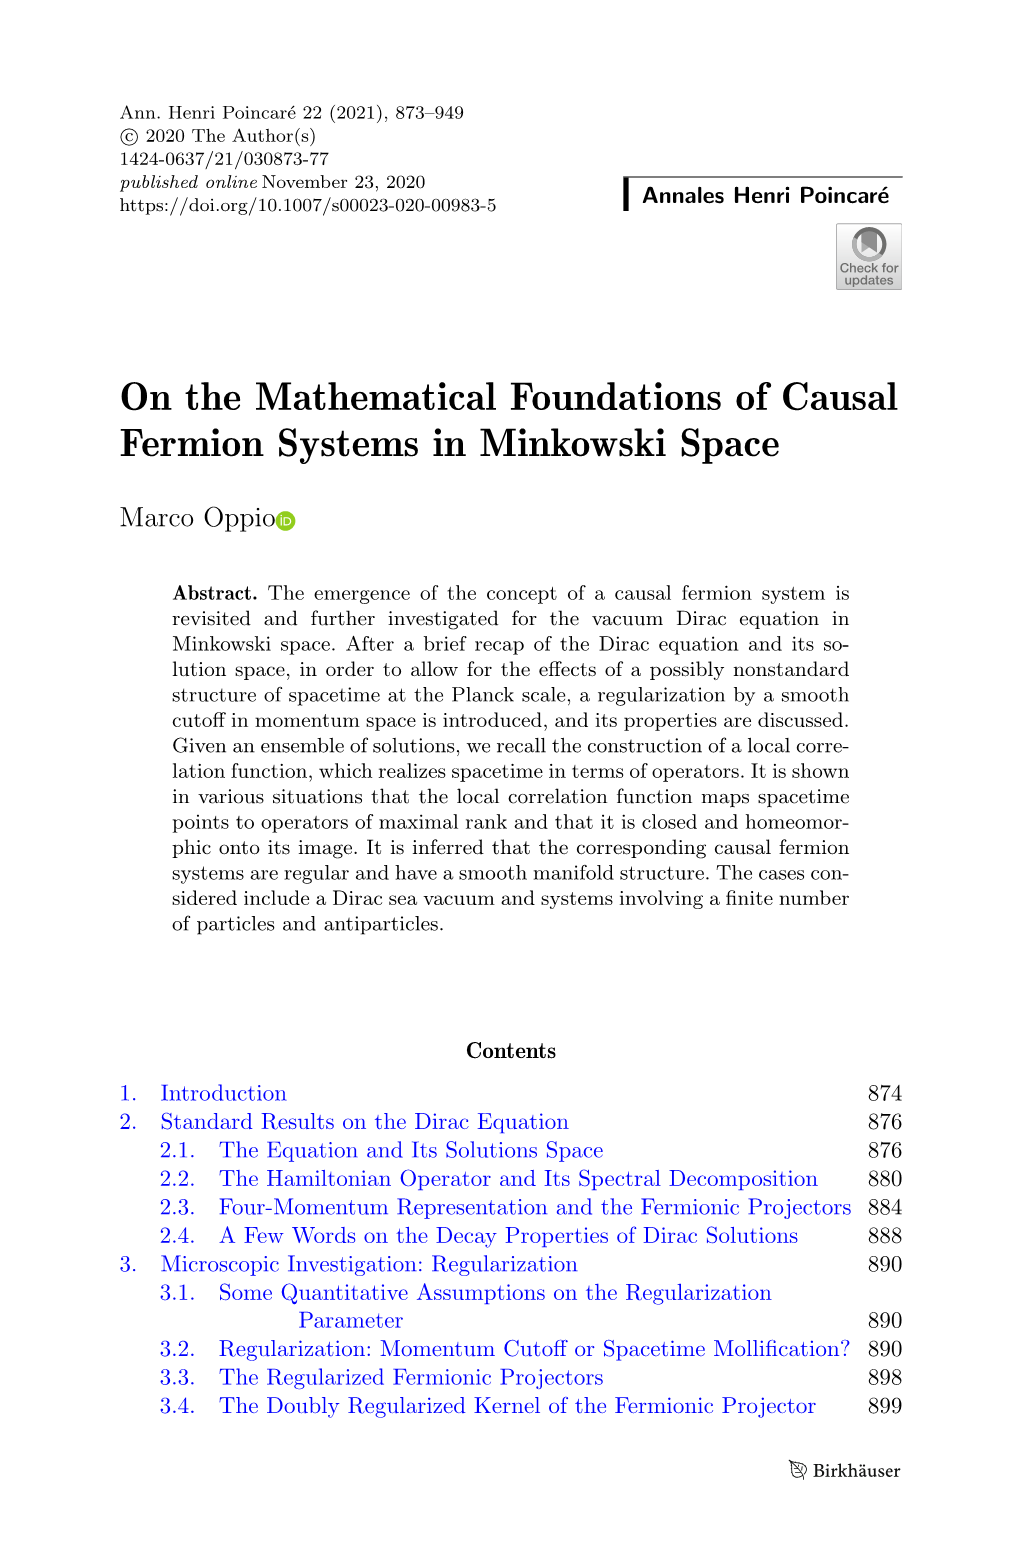 On the Mathematical Foundations of Causal Fermion Systems in Minkowski Space